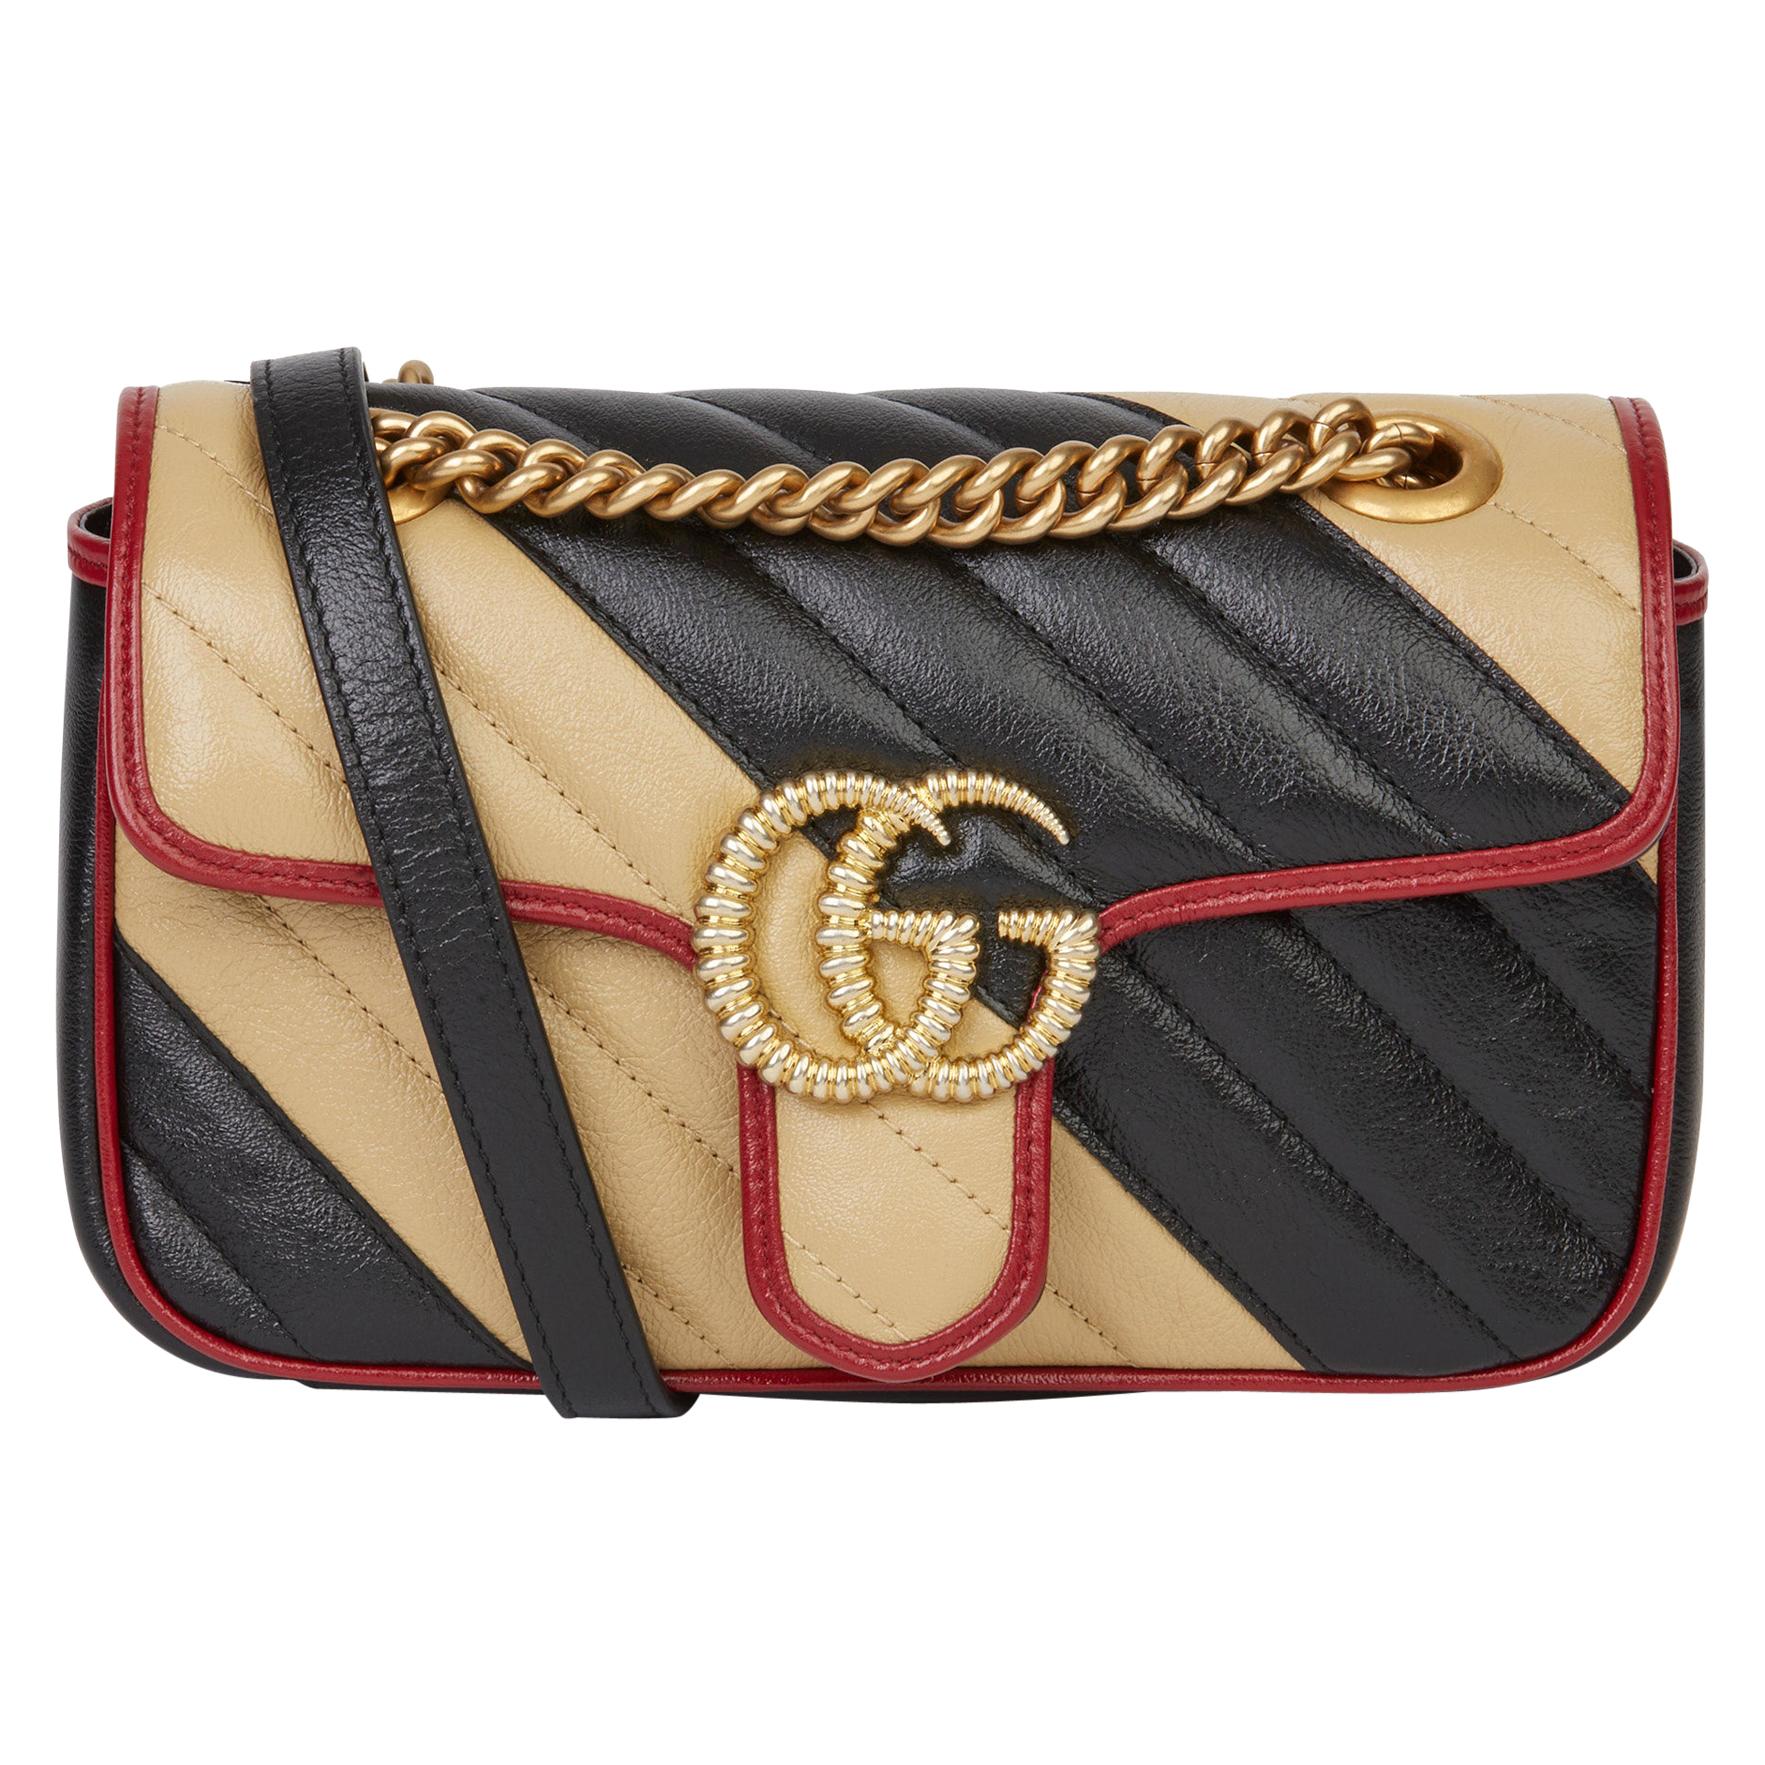 2020 Gucci Black Cream & Red Diagonal Quilted Aged Calfskin Leather Mini Marmont